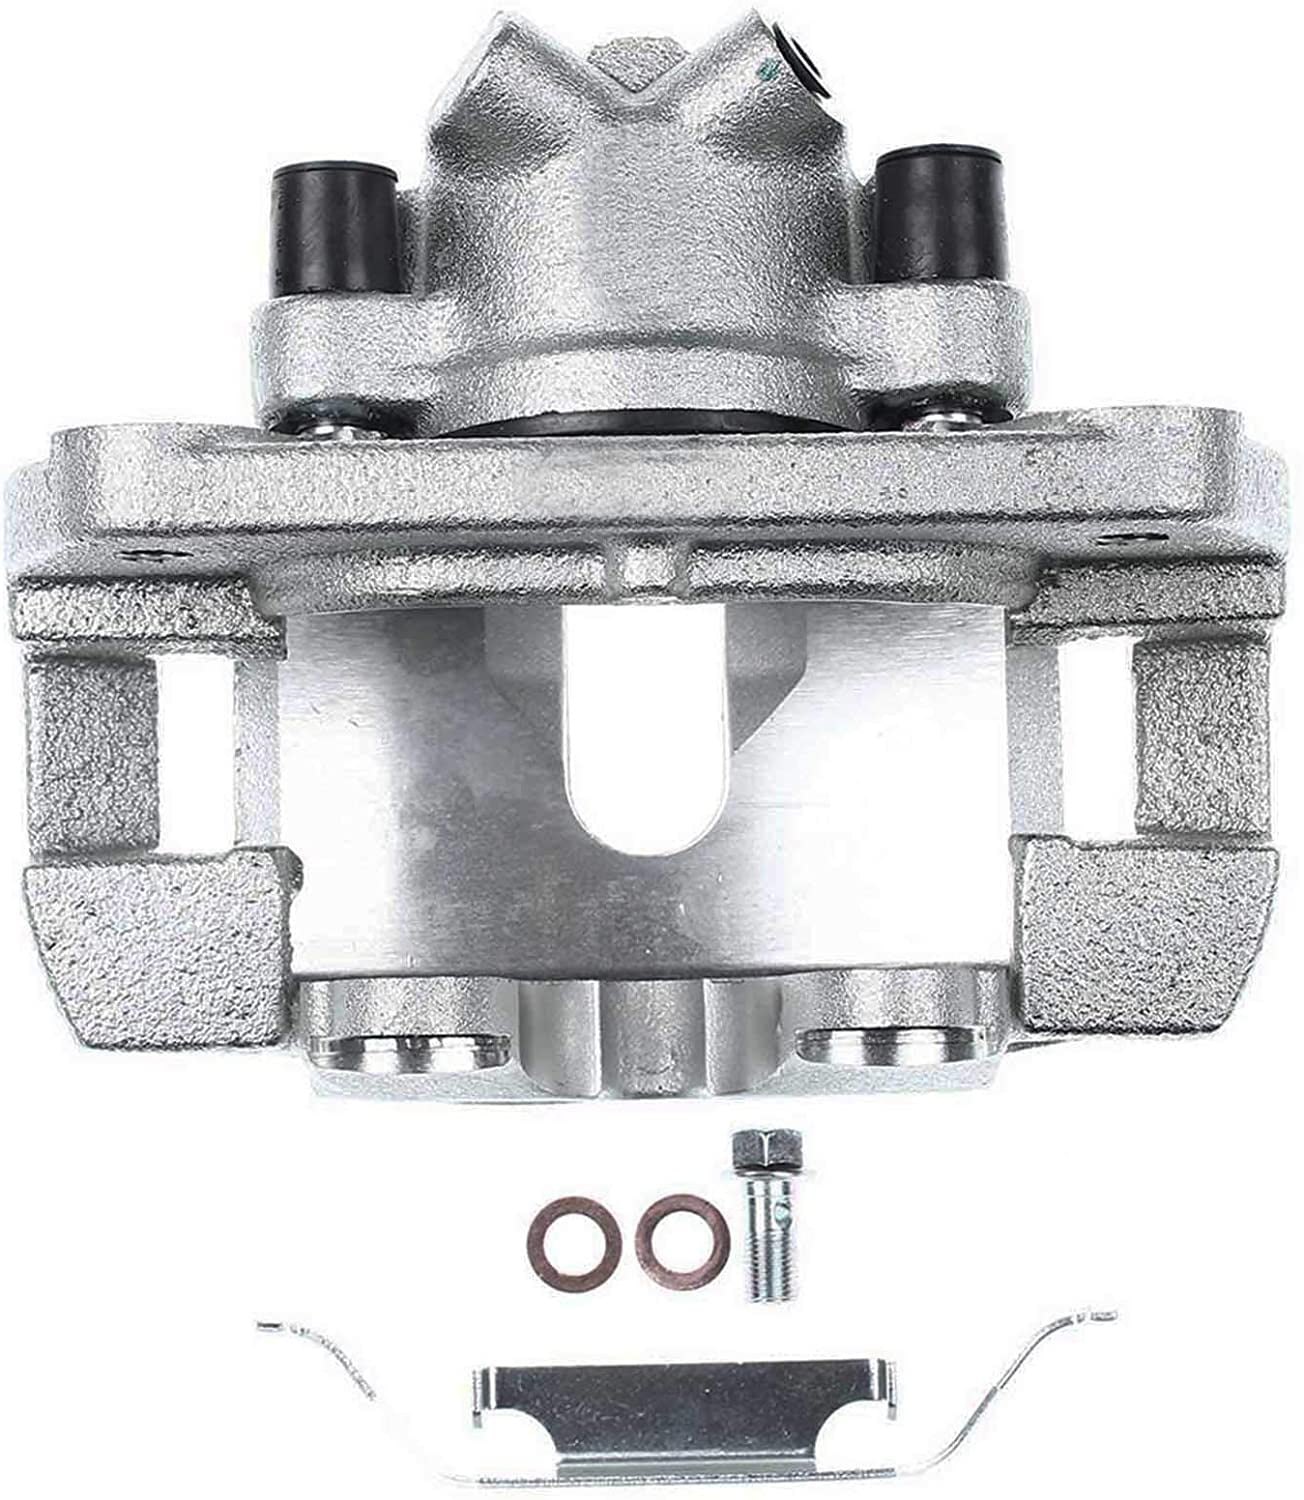 A-Premium Brake Caliper Assembly with Bracket Compatible with BMW E83 X3 2004-2011 Front Driver Side 